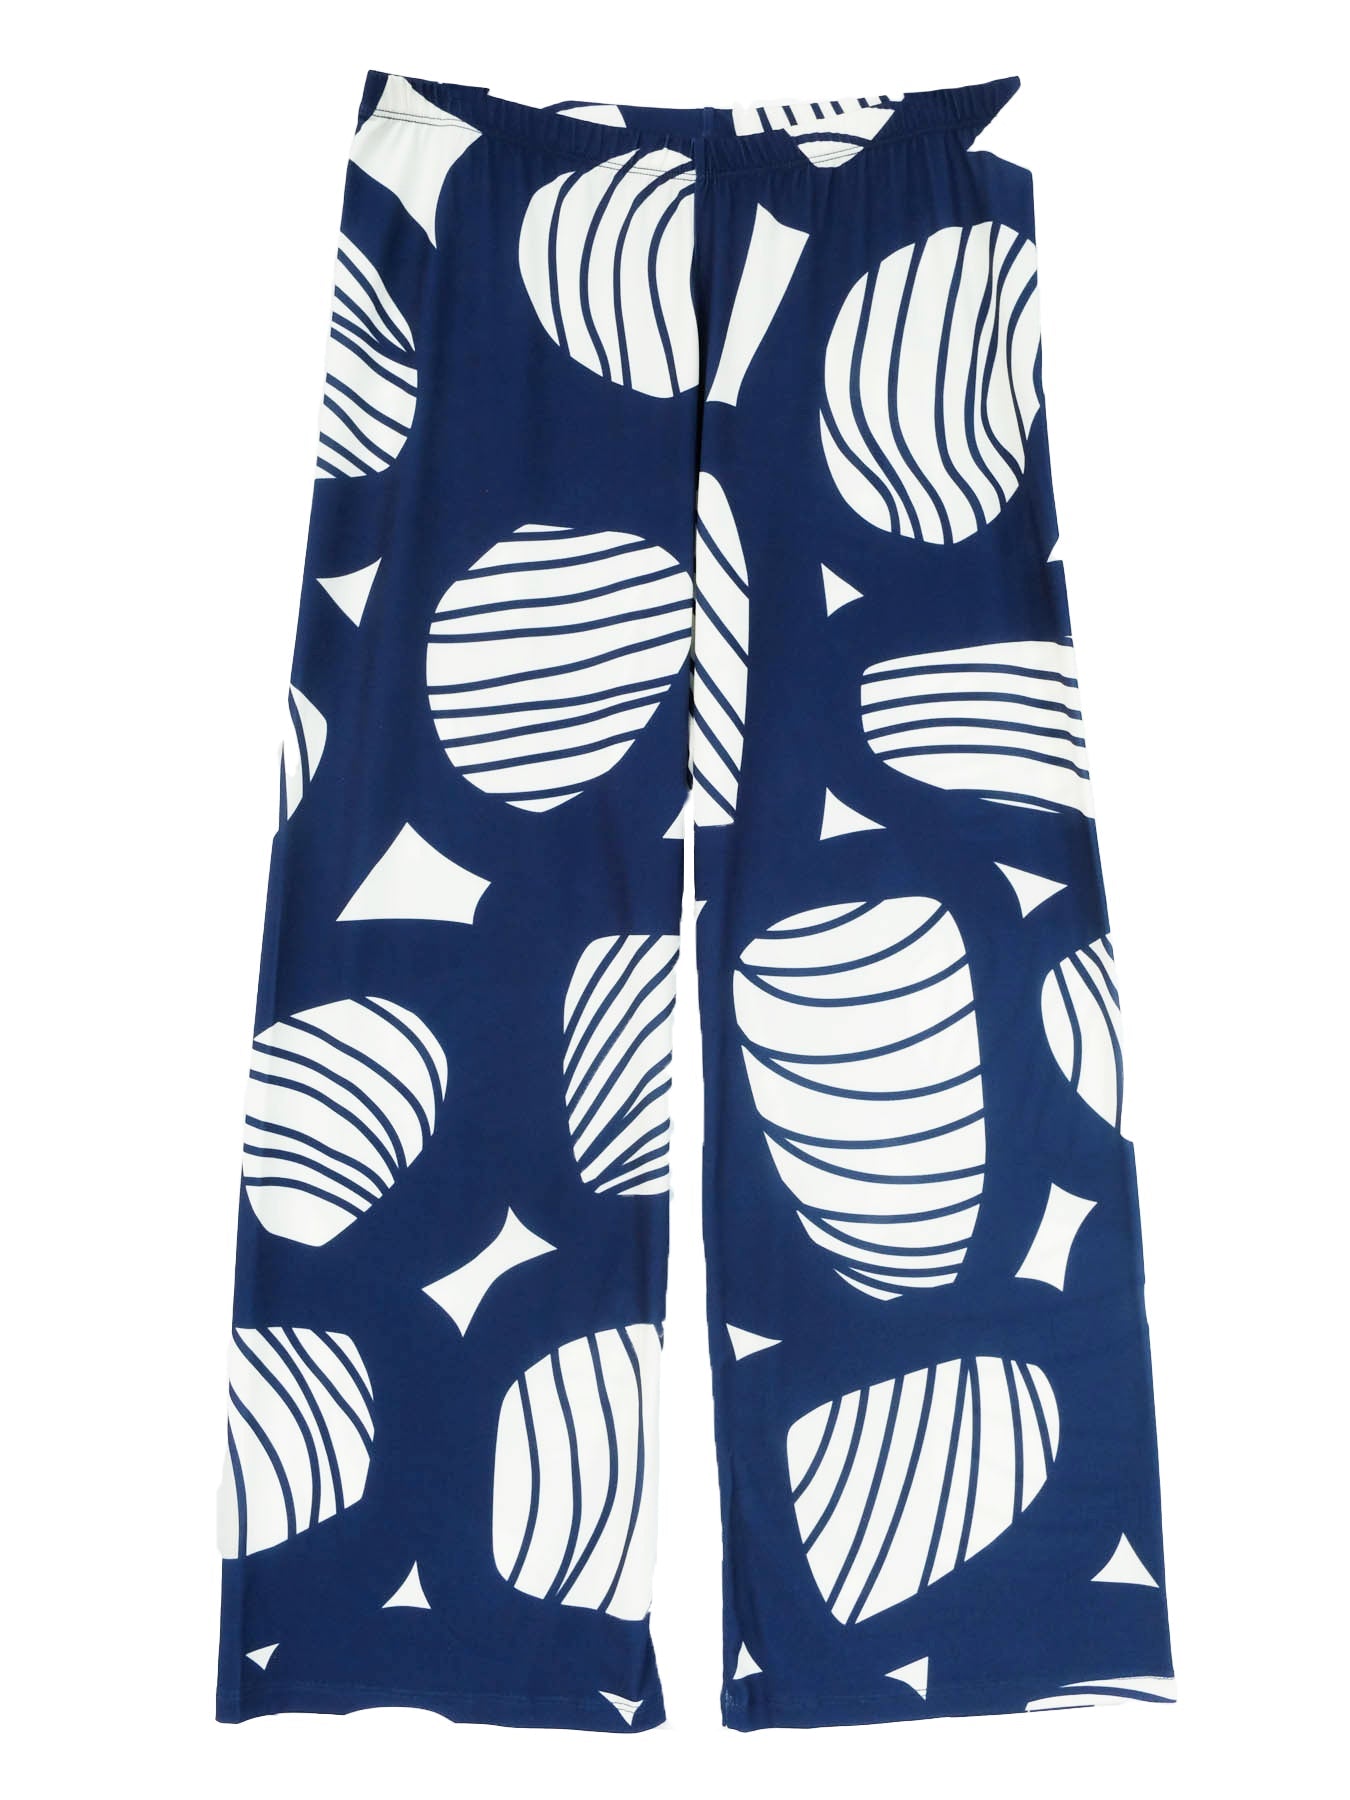 CELIE pant Woodpile Navy - Lesley Evers-Best Seller-Shop-Shop/All Products